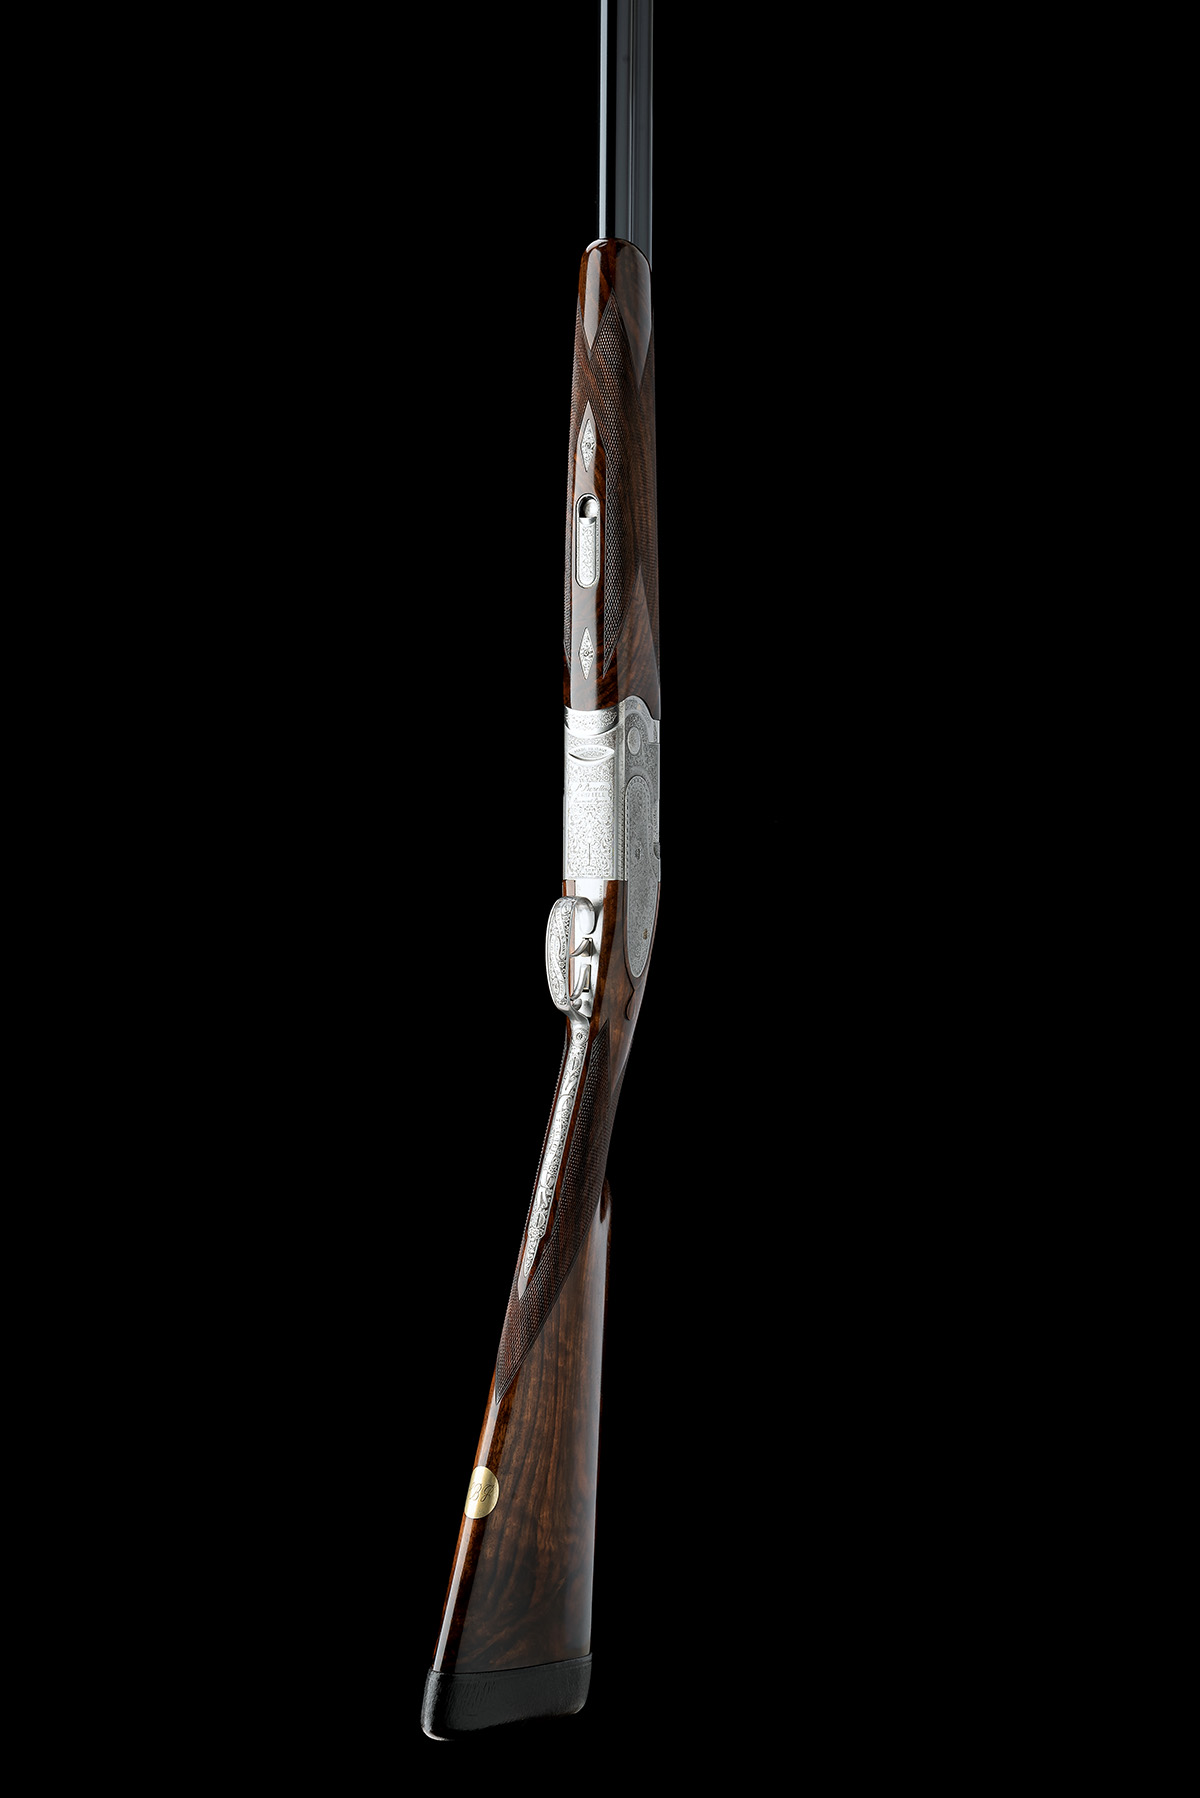 P. BERETTA CUSTOM BY A.A. BROWN & SONS A 12-BORE (3IN.) 'S687 EELL DIAMOND PIGEON - B.B. GAME DE - Image 8 of 11